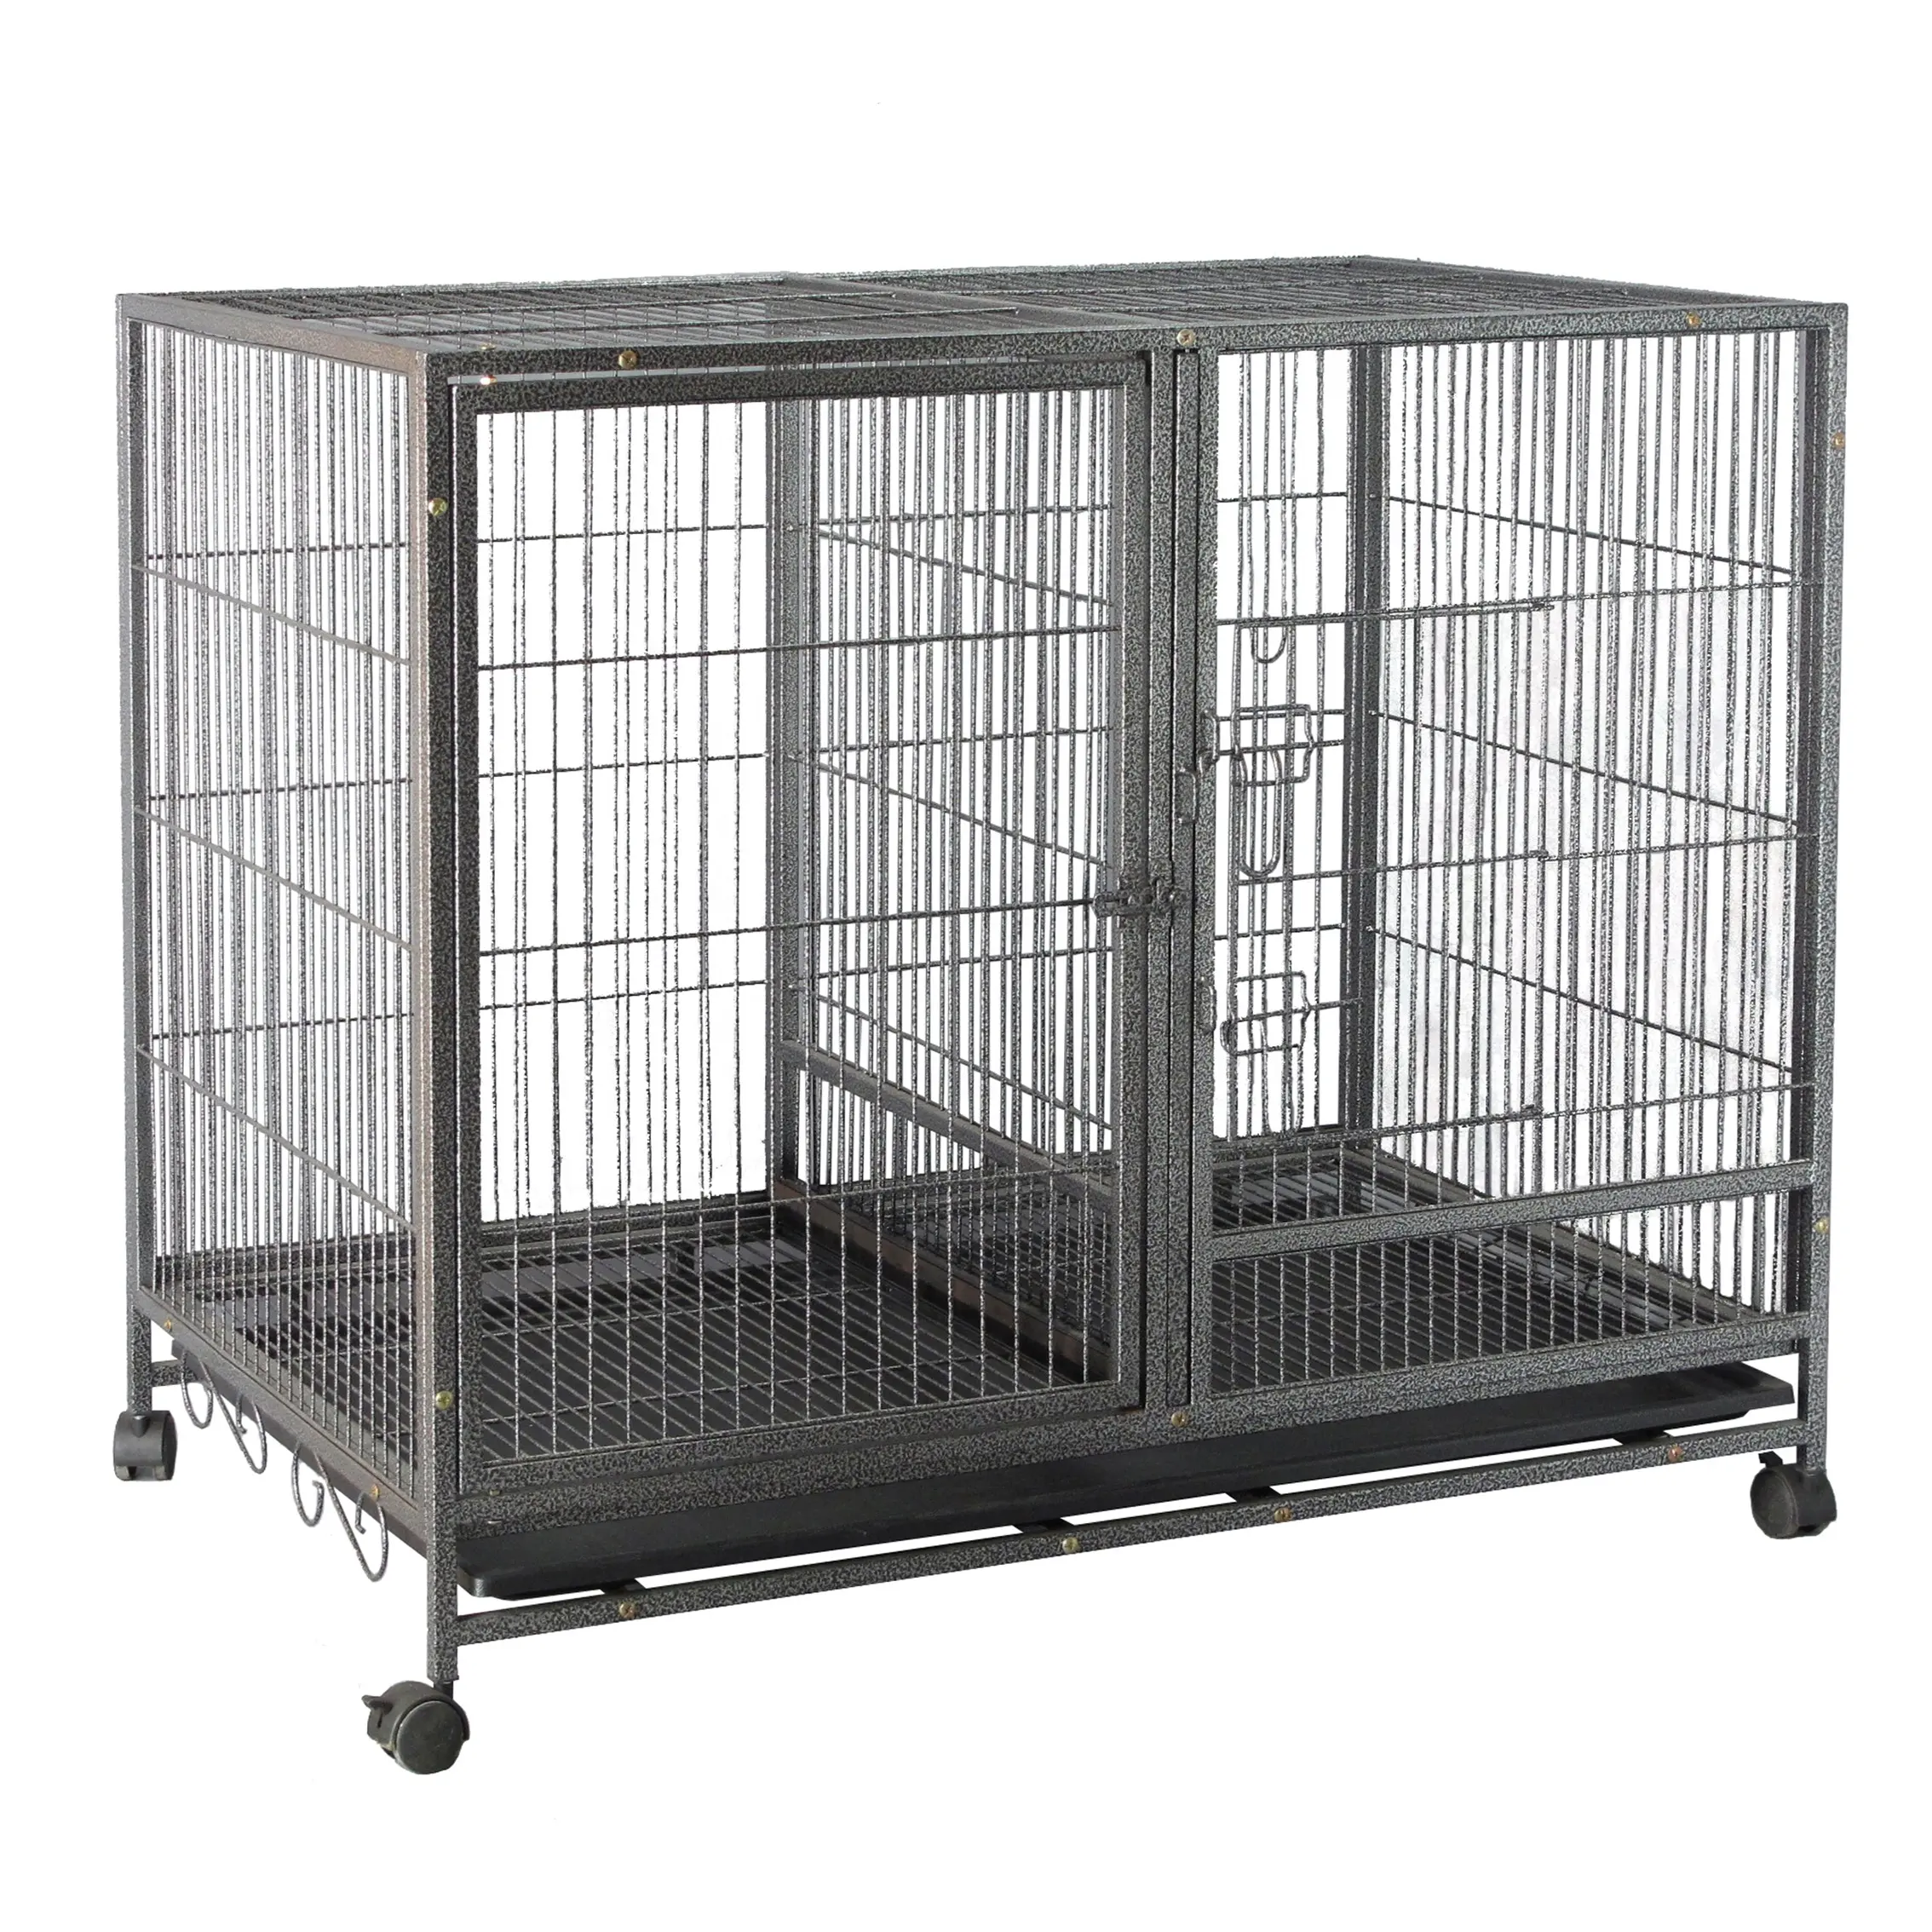 Wholesale Pet Cage Stainless Steel Kennels For Dogs Outdoor Used Large Iron Wire Dog Cage